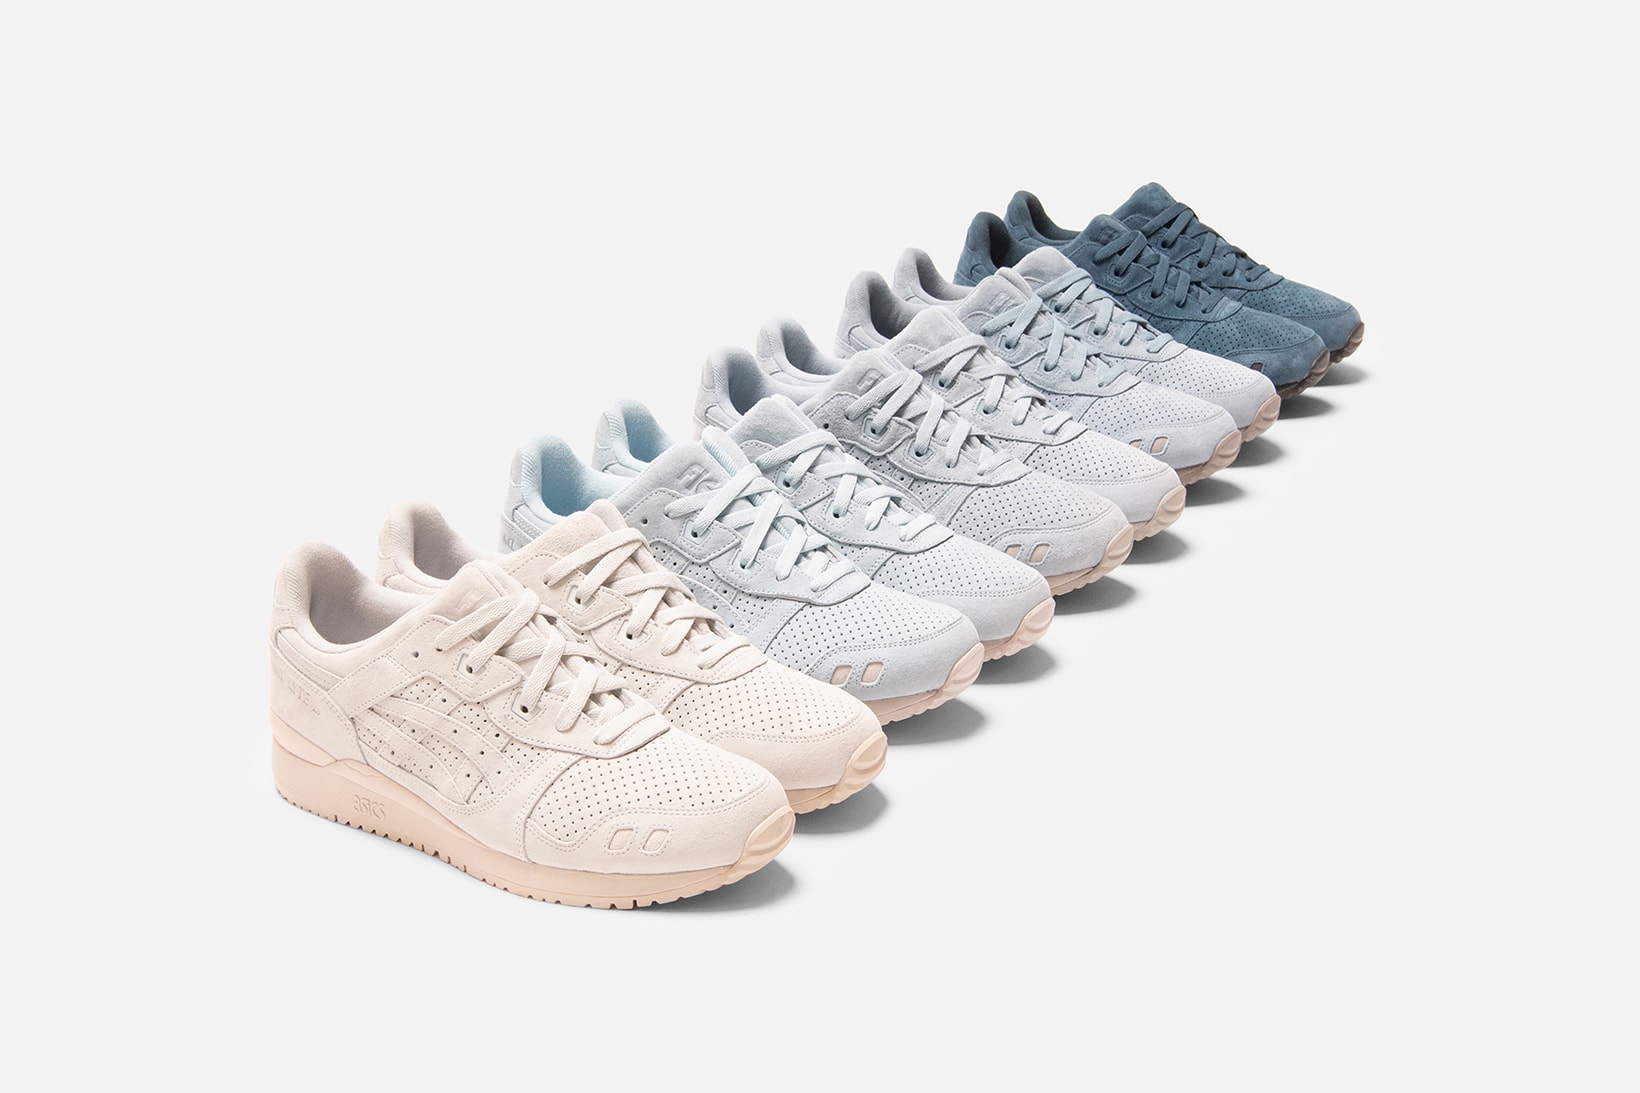 asics kith ronnie fieg collaboration gel lyte iii the palette colorways footwear shoes 